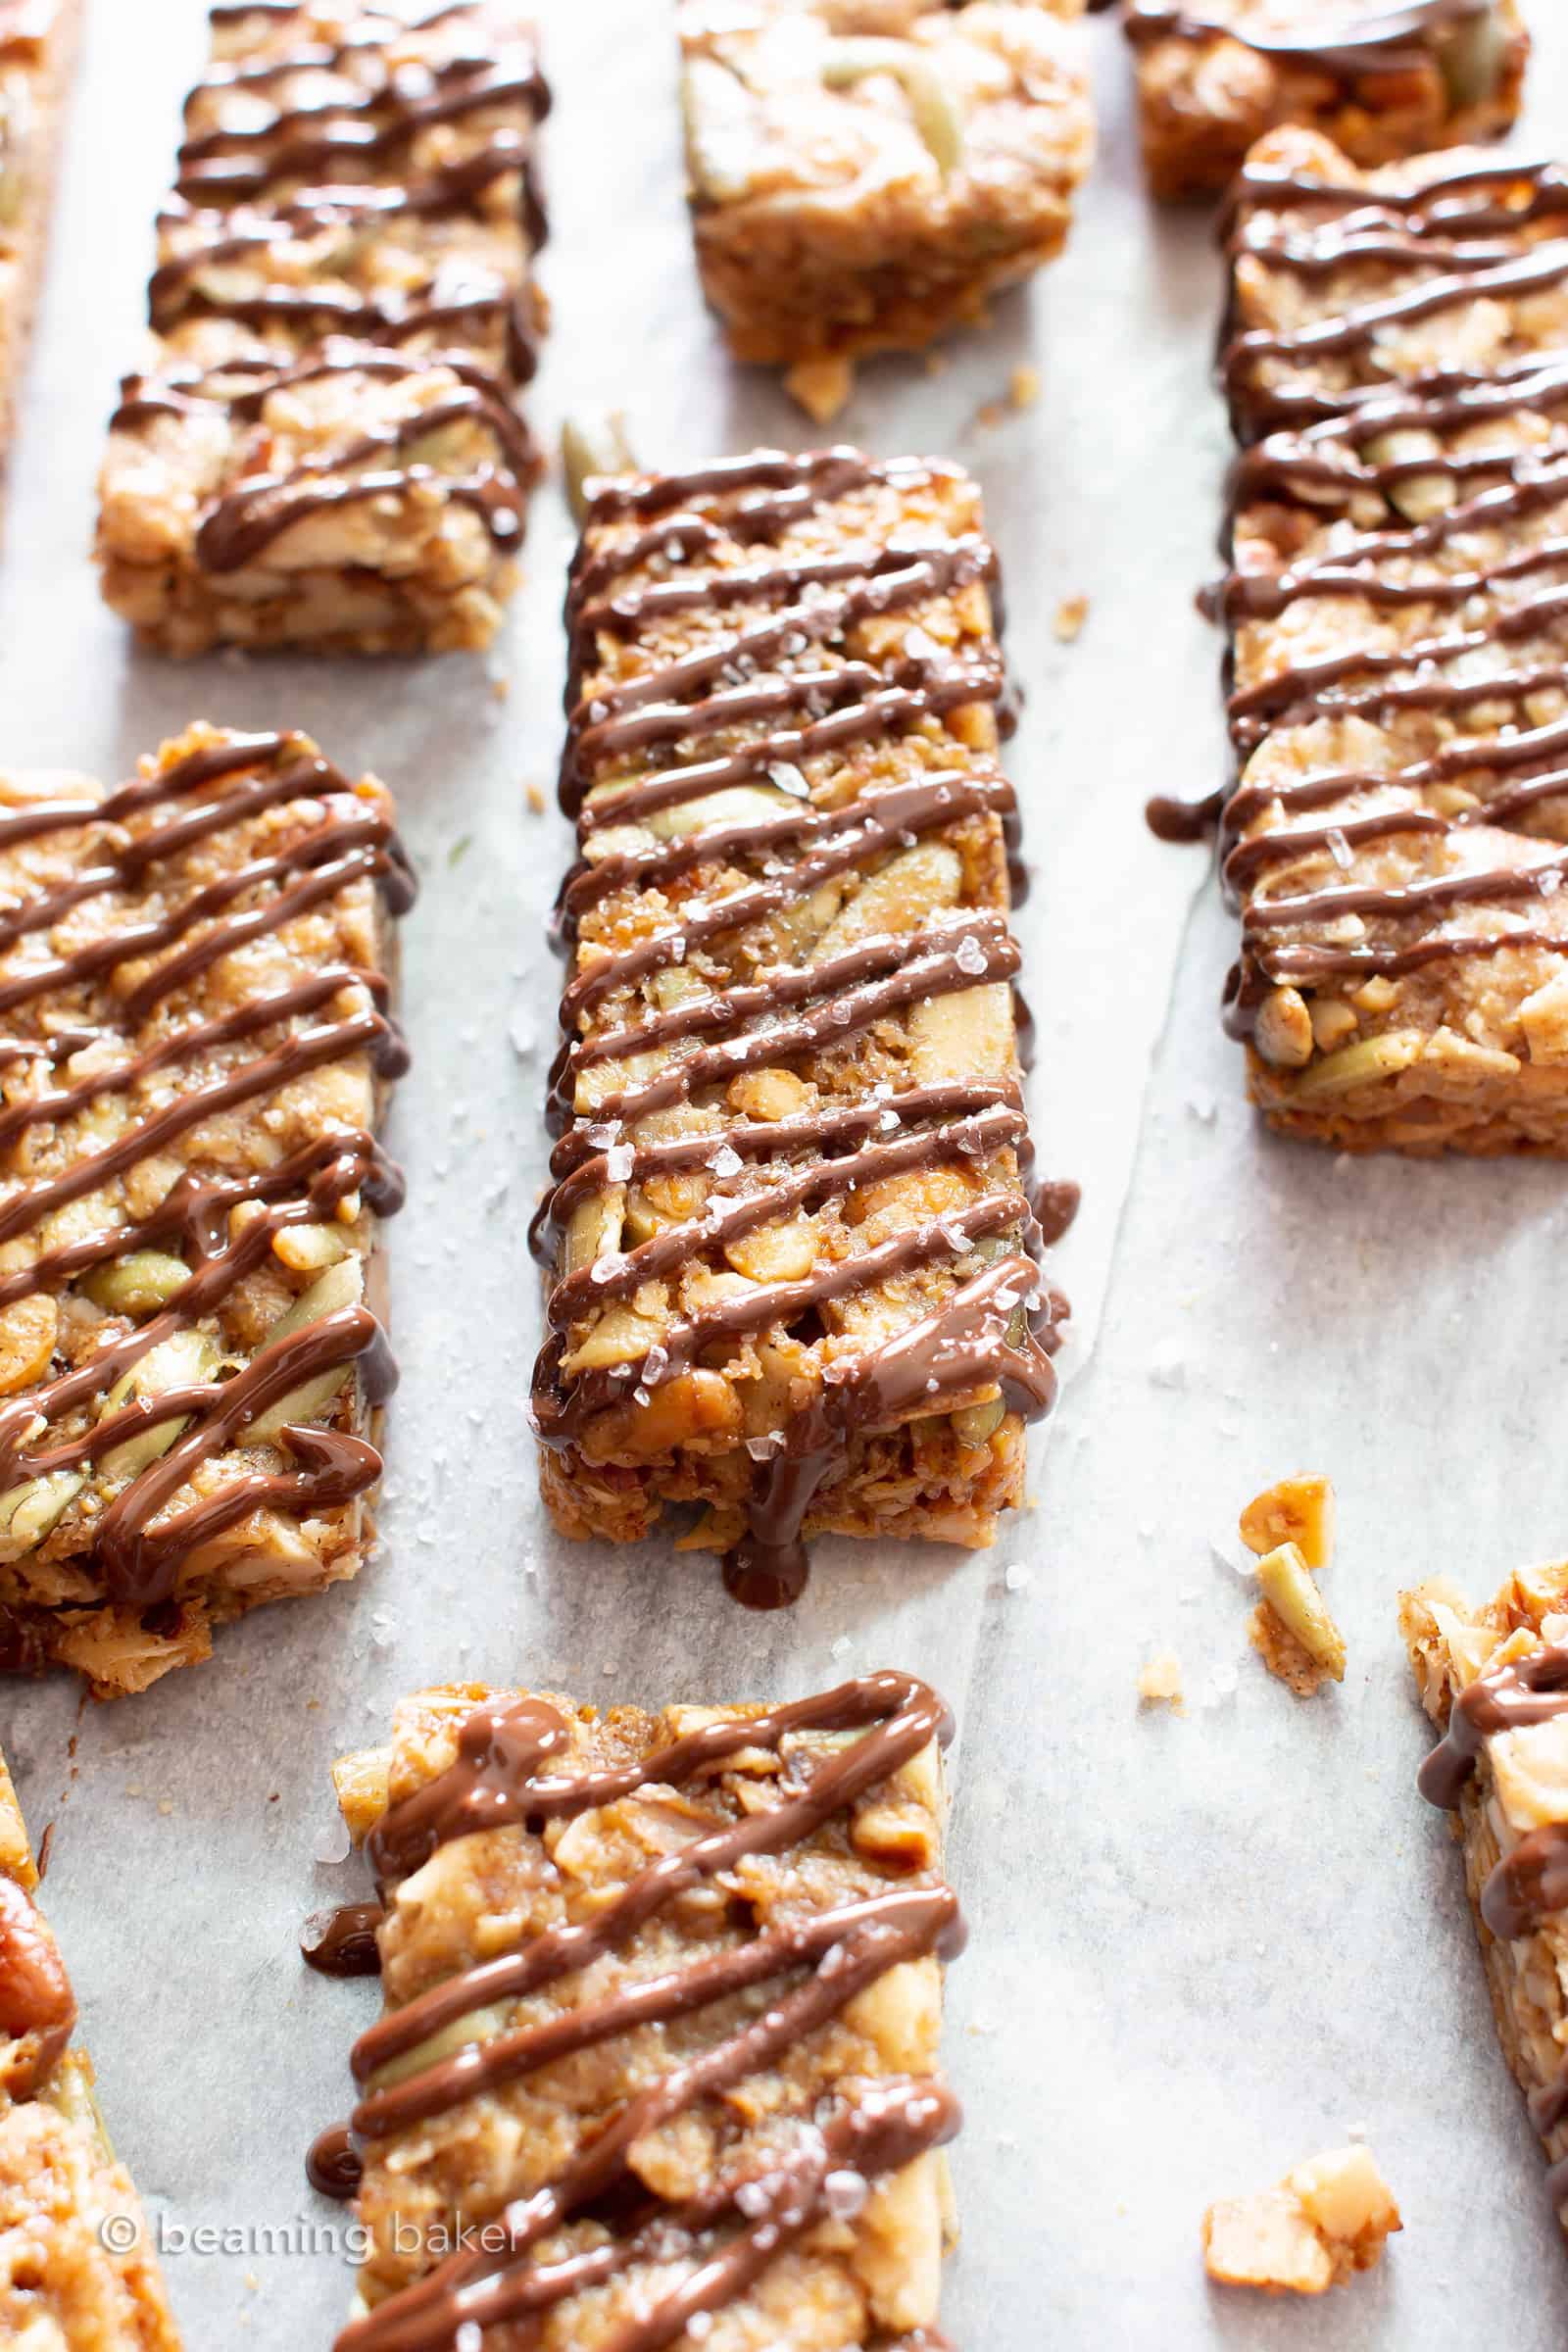 Sea Salt Chocolate Paleo Granola Bars Recipe (GF): this grain free granola bars recipe is easy & delicious! The BEST salty & sweet gluten free granola bars—super nutty, drizzled with chocolate & topped with sea salt. #Paleo #GrainFree #GlutenFree #Vegan #GranolaBars | Recipe at BeamingBaker.com